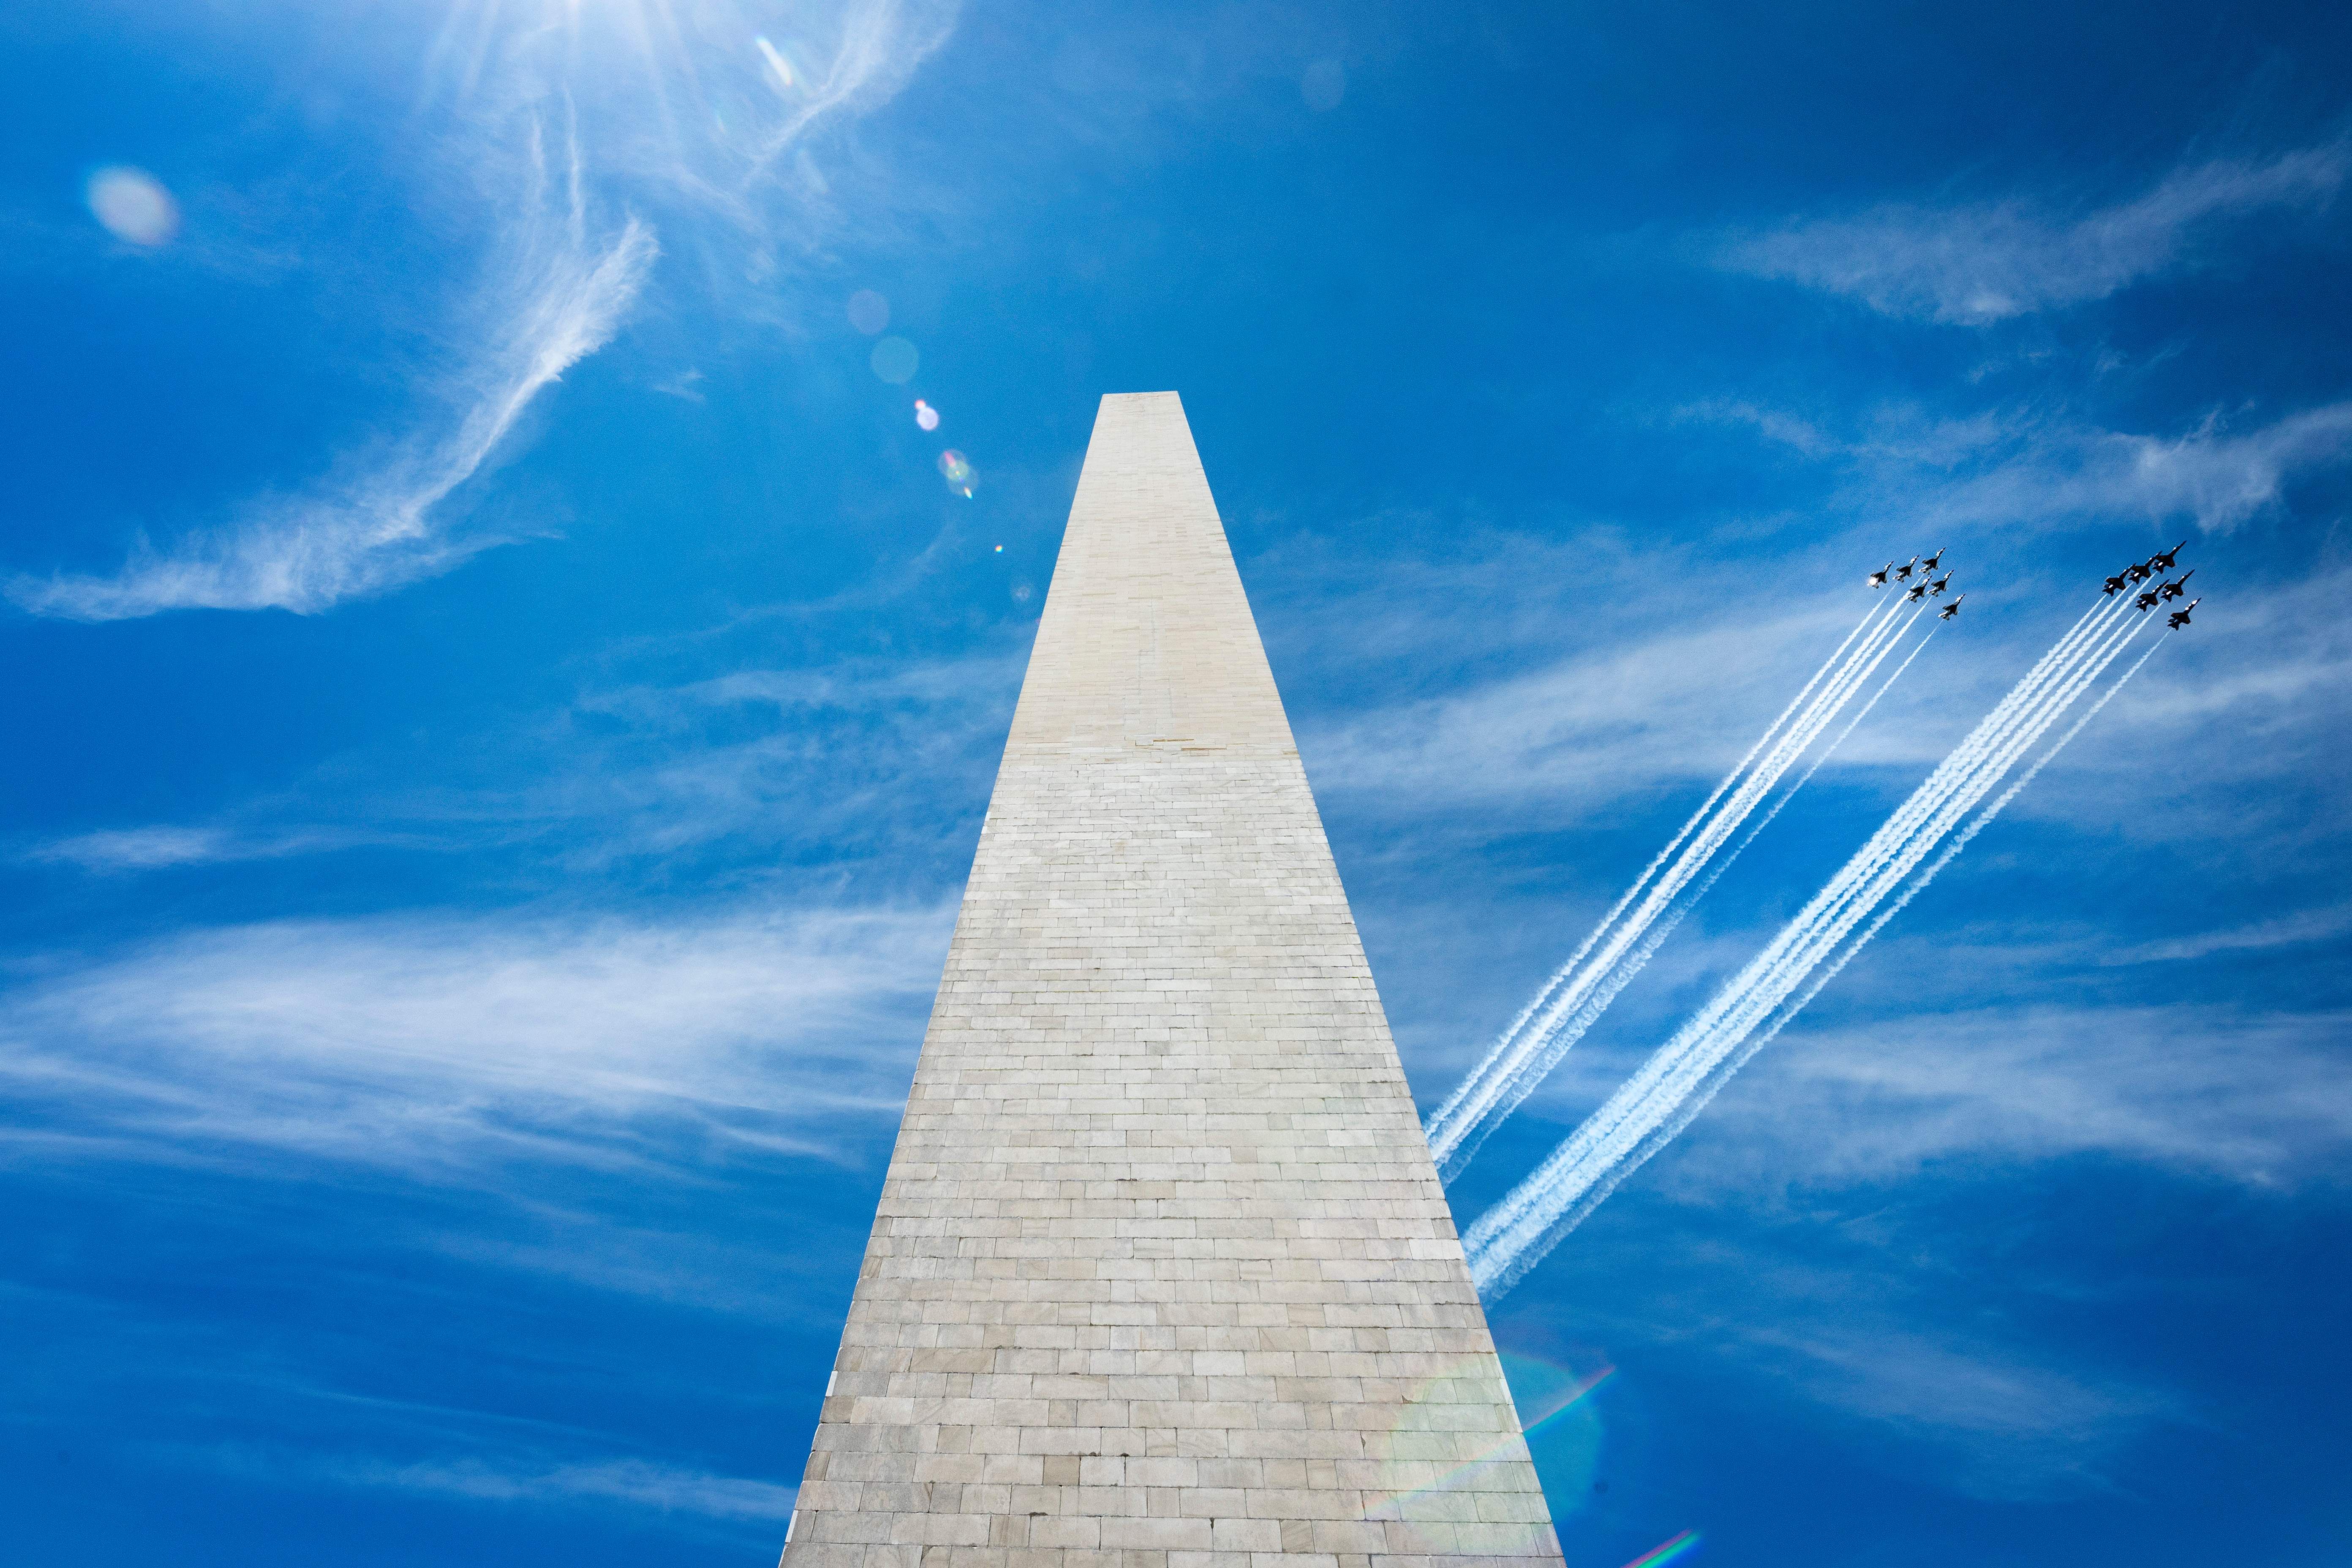 The planes fly past the Washington monument